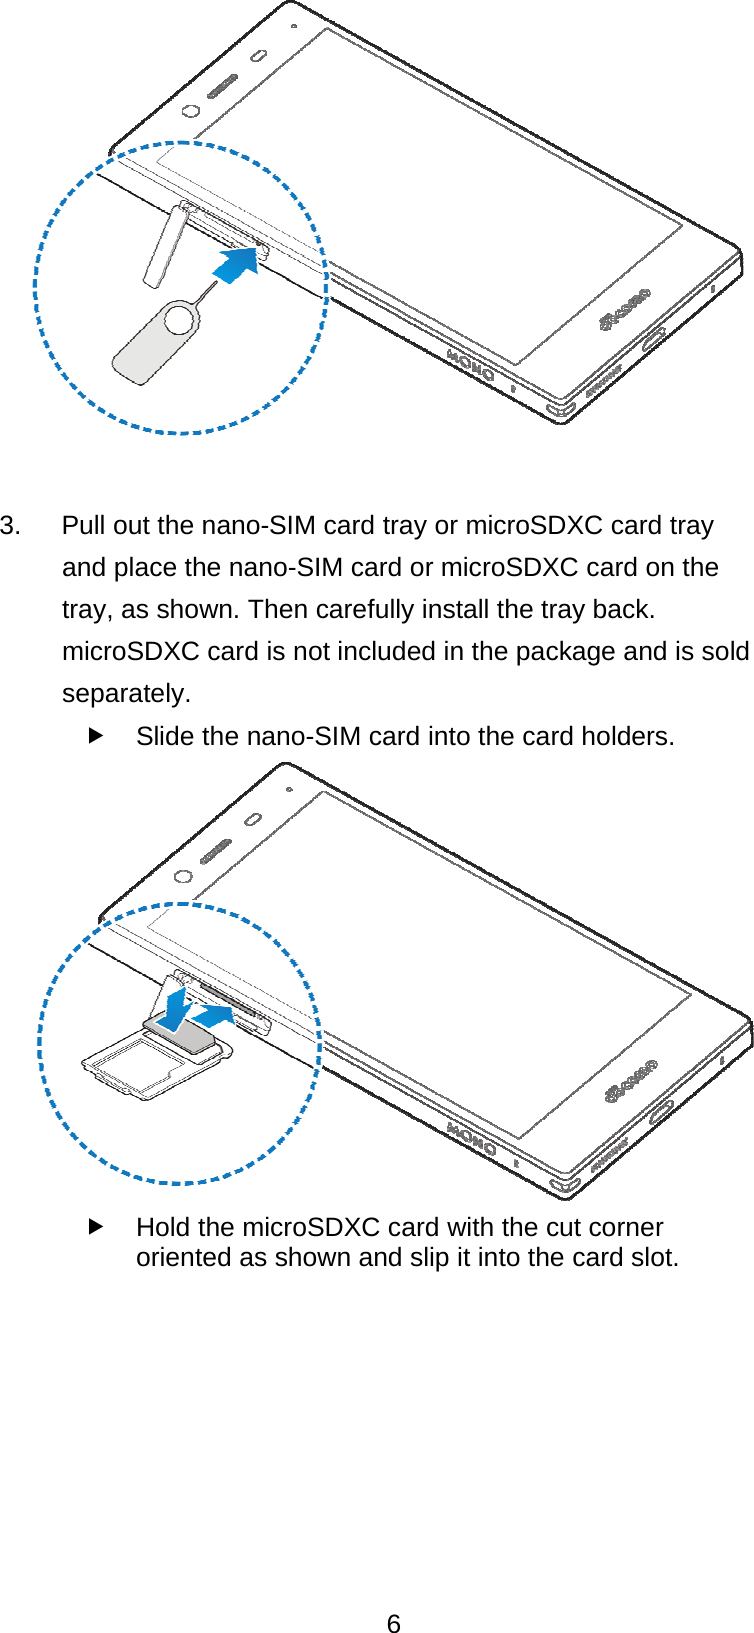  6  3.      Pull out the nano-SIM card tray or microSDXC card tray and place the nano-SIM card or microSDXC card on the tray, as shown. Then carefully install the tray back. microSDXC card is not included in the package and is sold separately.   Slide the nano-SIM card into the card holders.    Hold the microSDXC card with the cut corner oriented as shown and slip it into the card slot.  